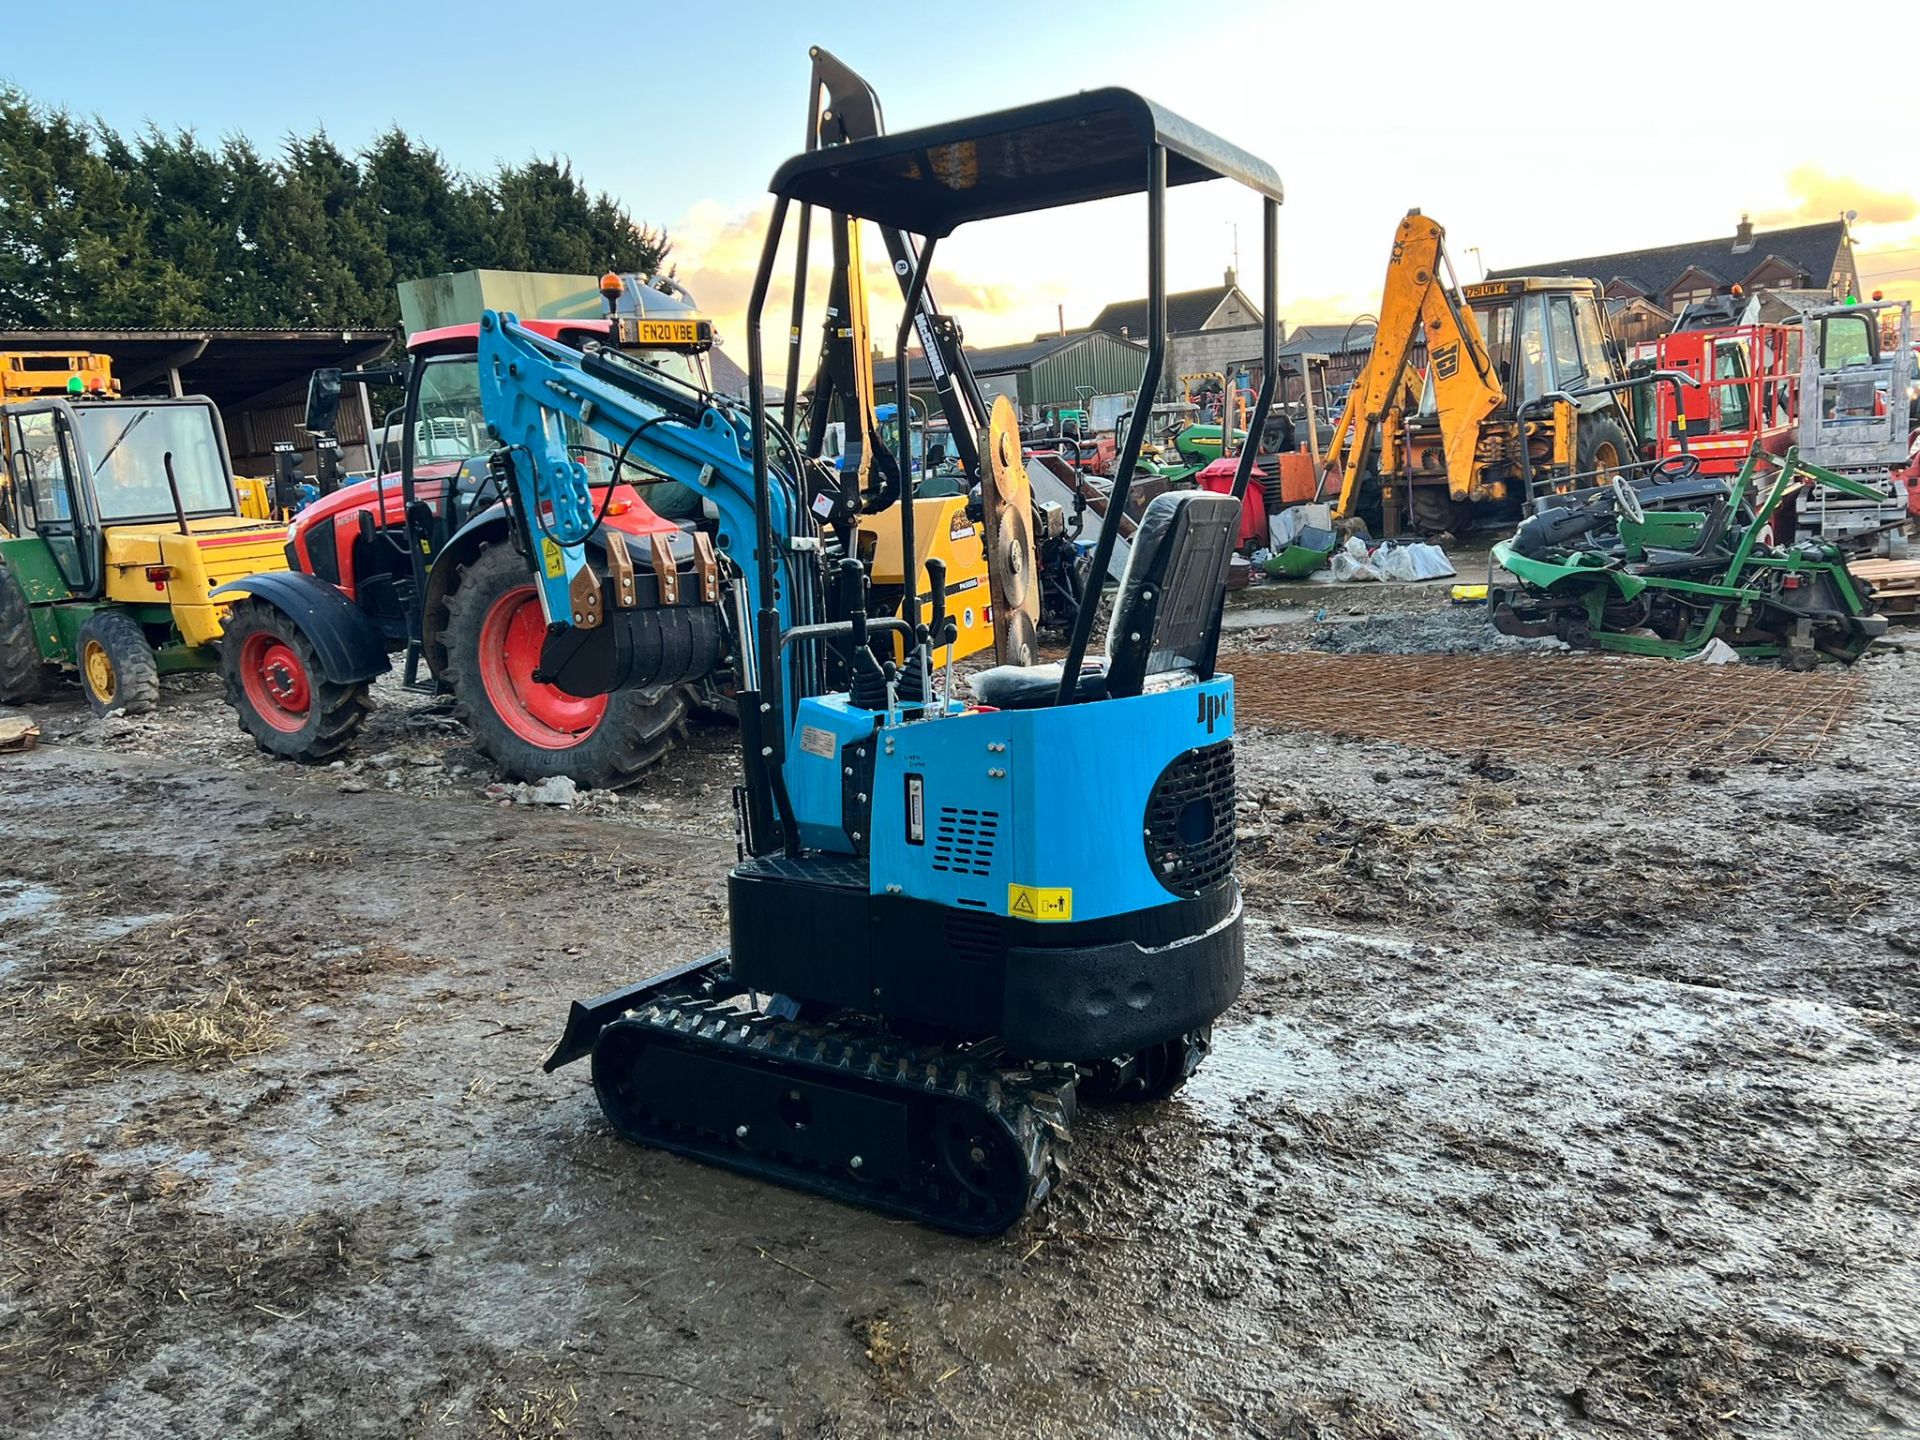 NEW AND UNUSED JPC HT12 1 TON MINI DIGGER, RUNS DRIVES AND DIGS, PIPED FOR FRONT ATTACHMENTS - Image 4 of 11